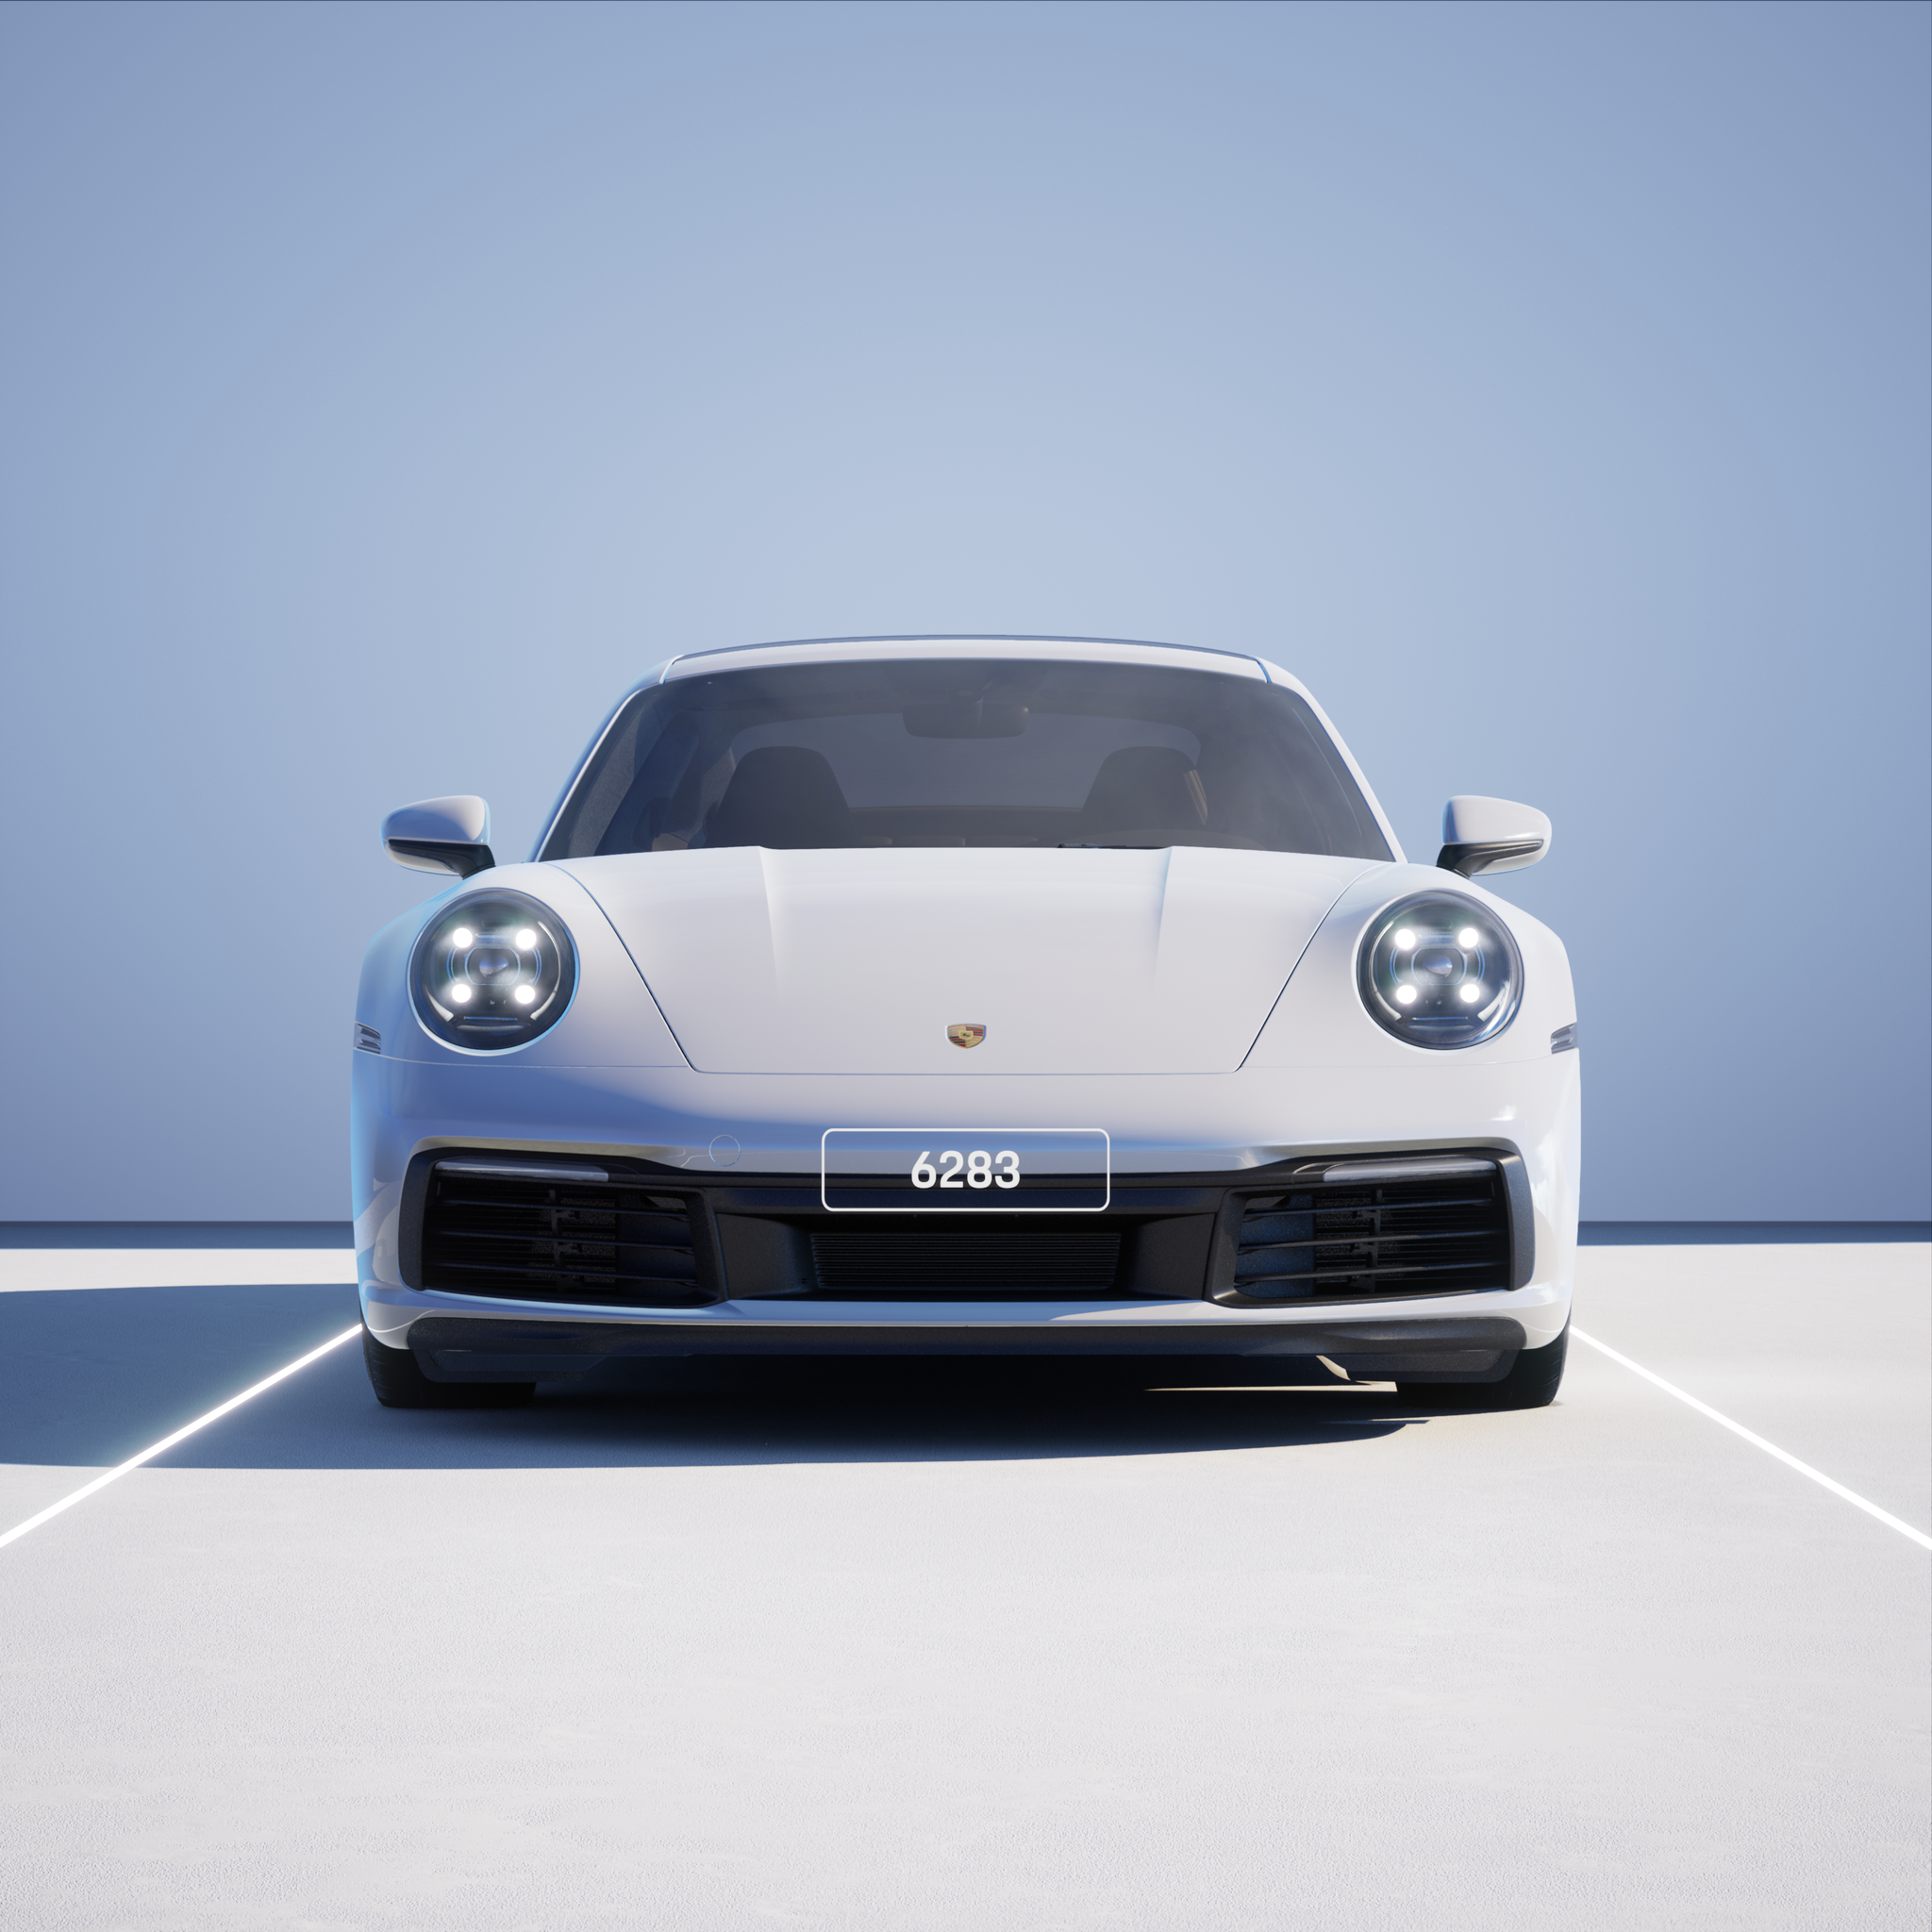 The PORSCHΞ 911 6283 image in phase